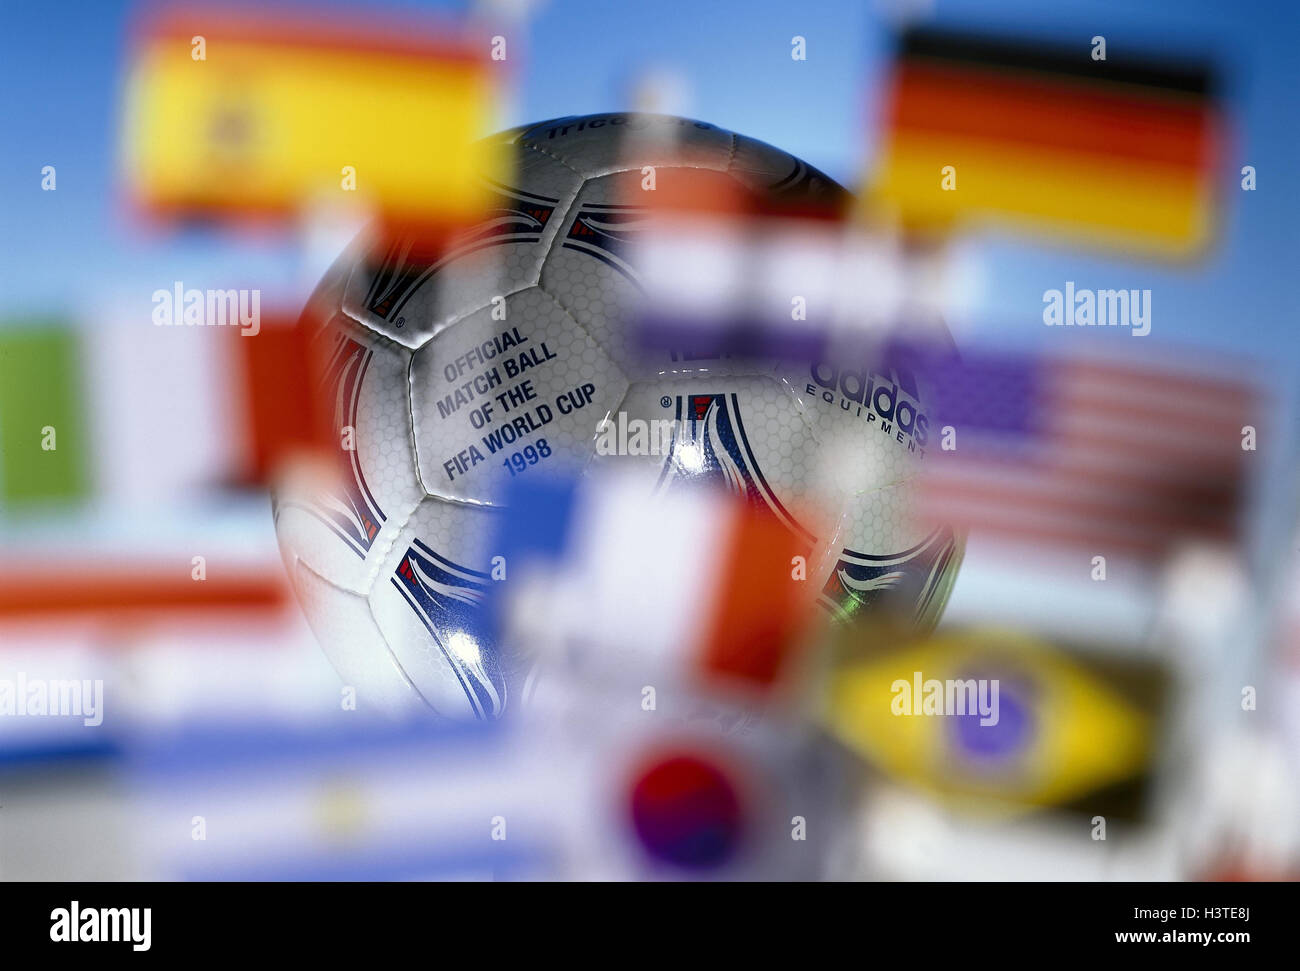 Football, flags, internationally, blur, no property release, Still life, product photography, icon, sport, sport, ball, worldwide, world championship, world championship, Football World Cup, in 1998, flags, football nations, nations, participants, countri Stock Photo